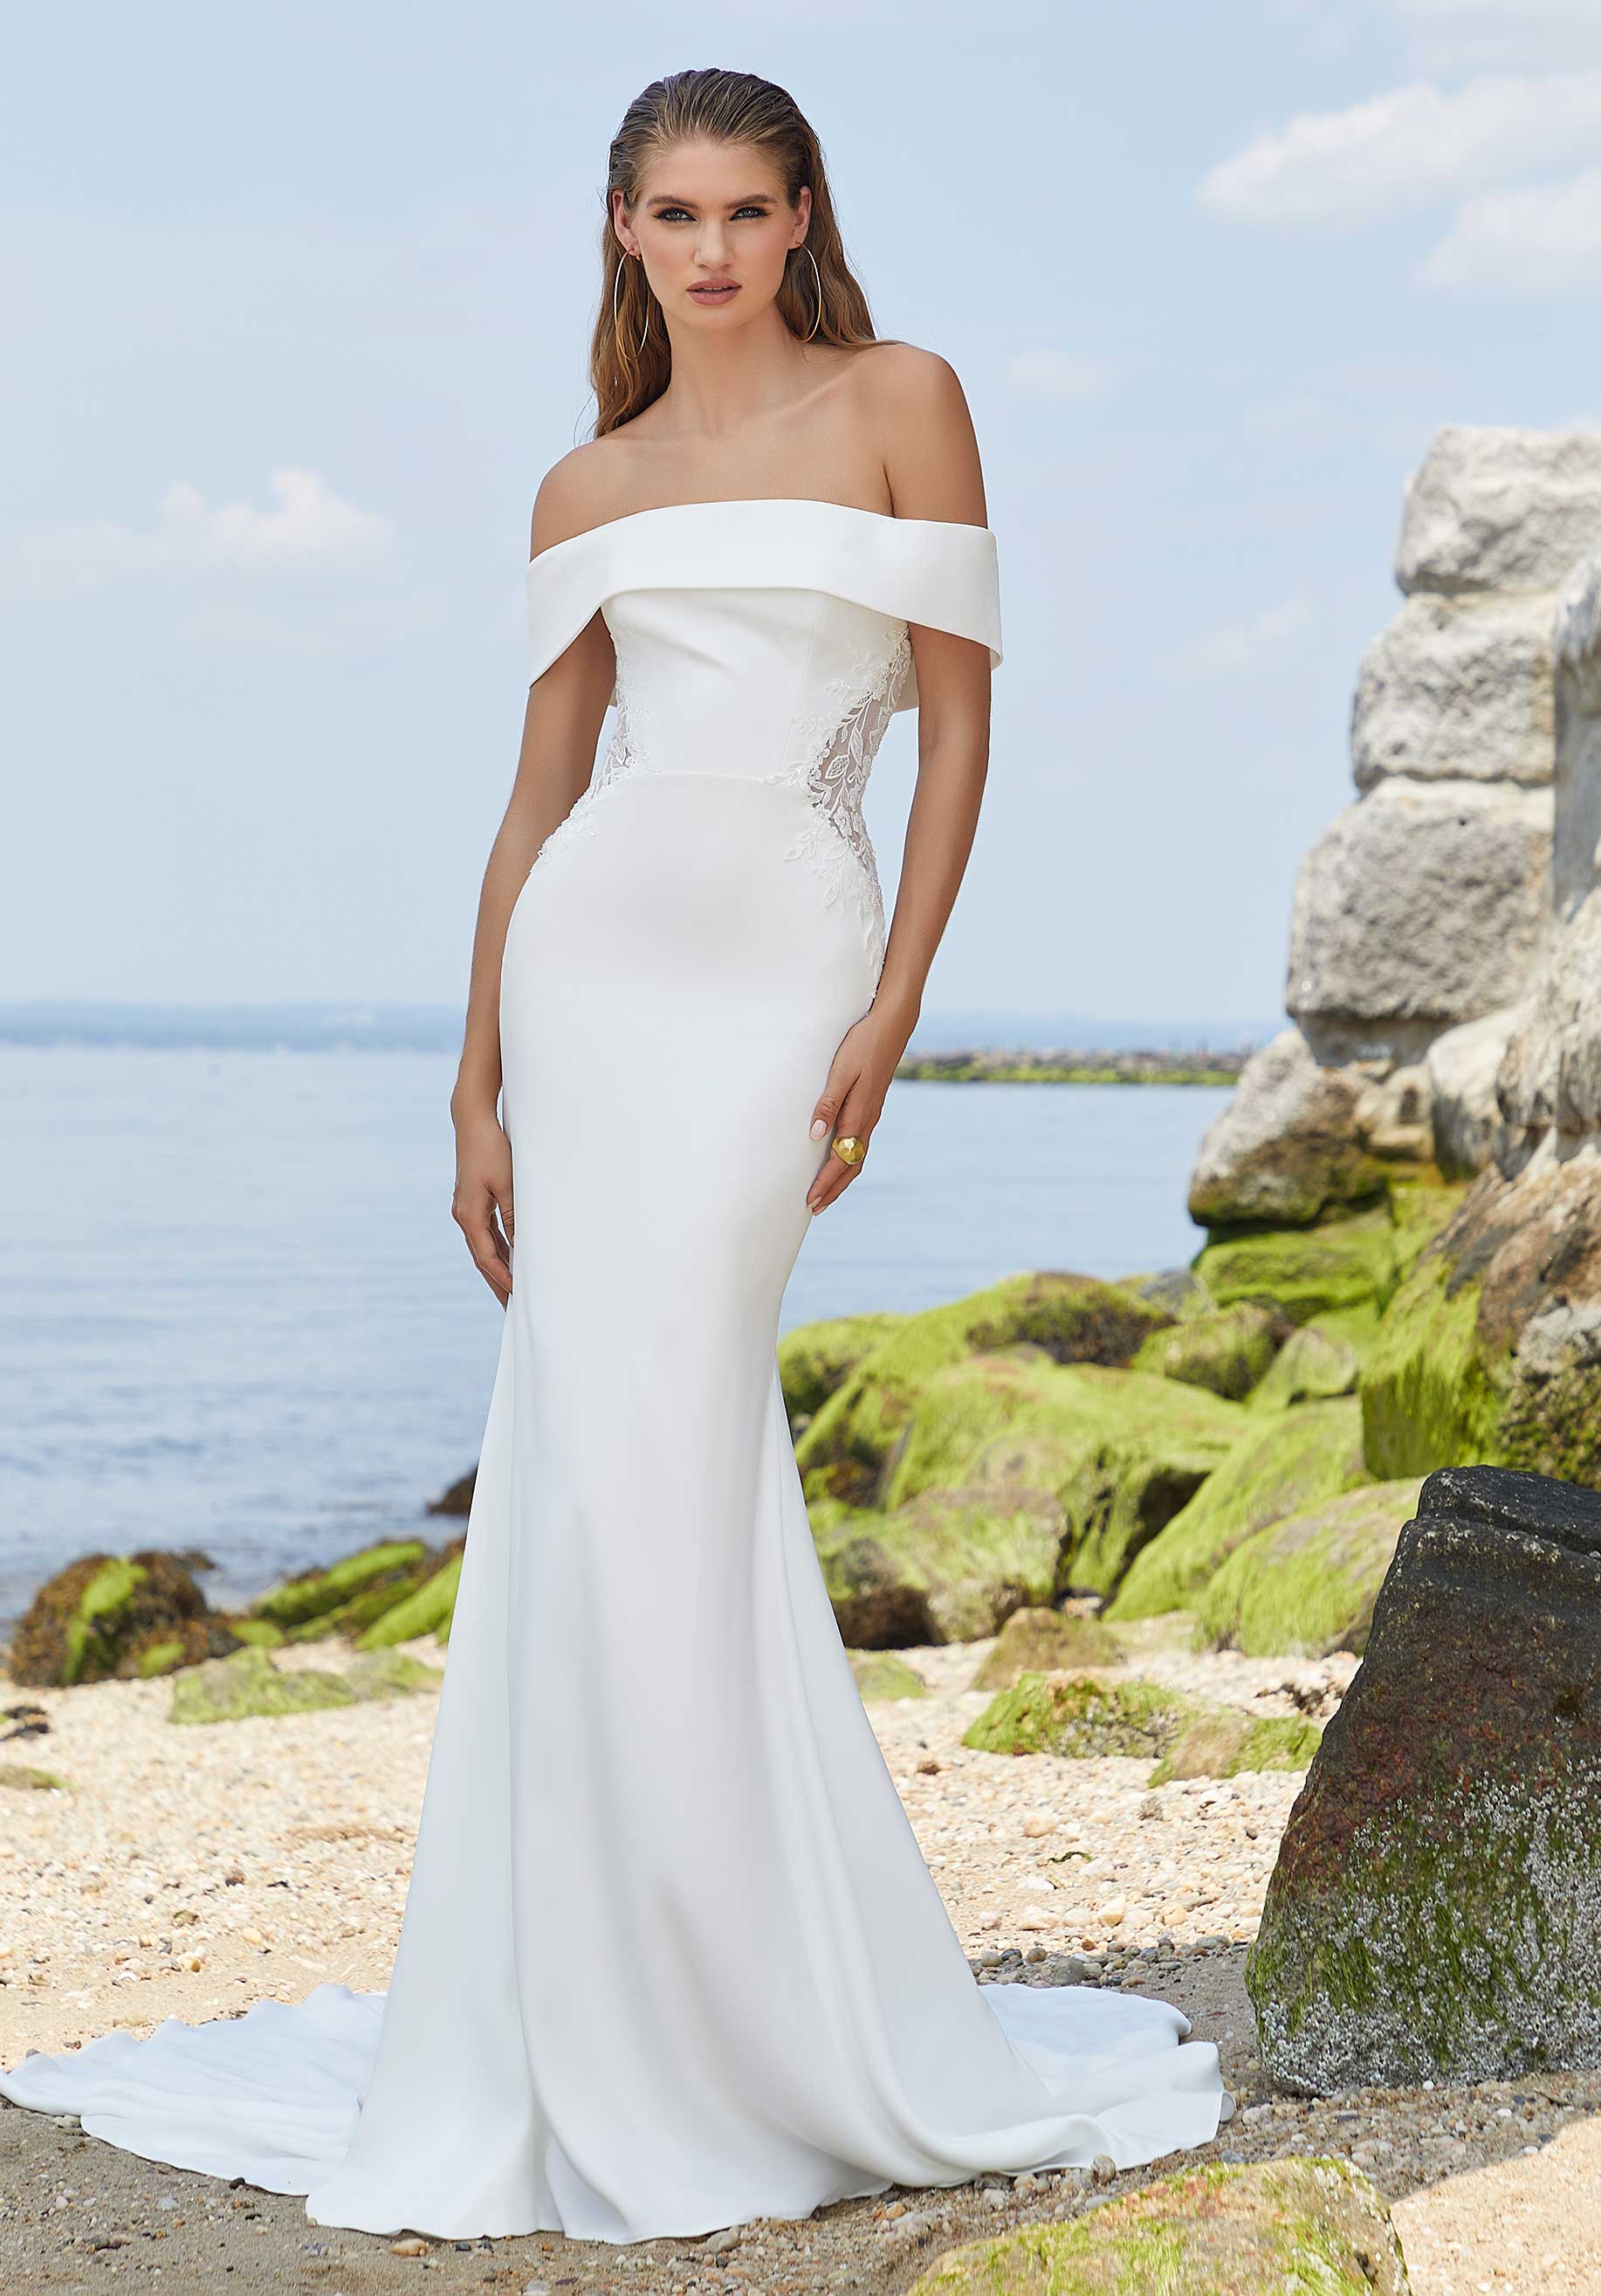 Matera a simple wedding dress with pockets - wed2b